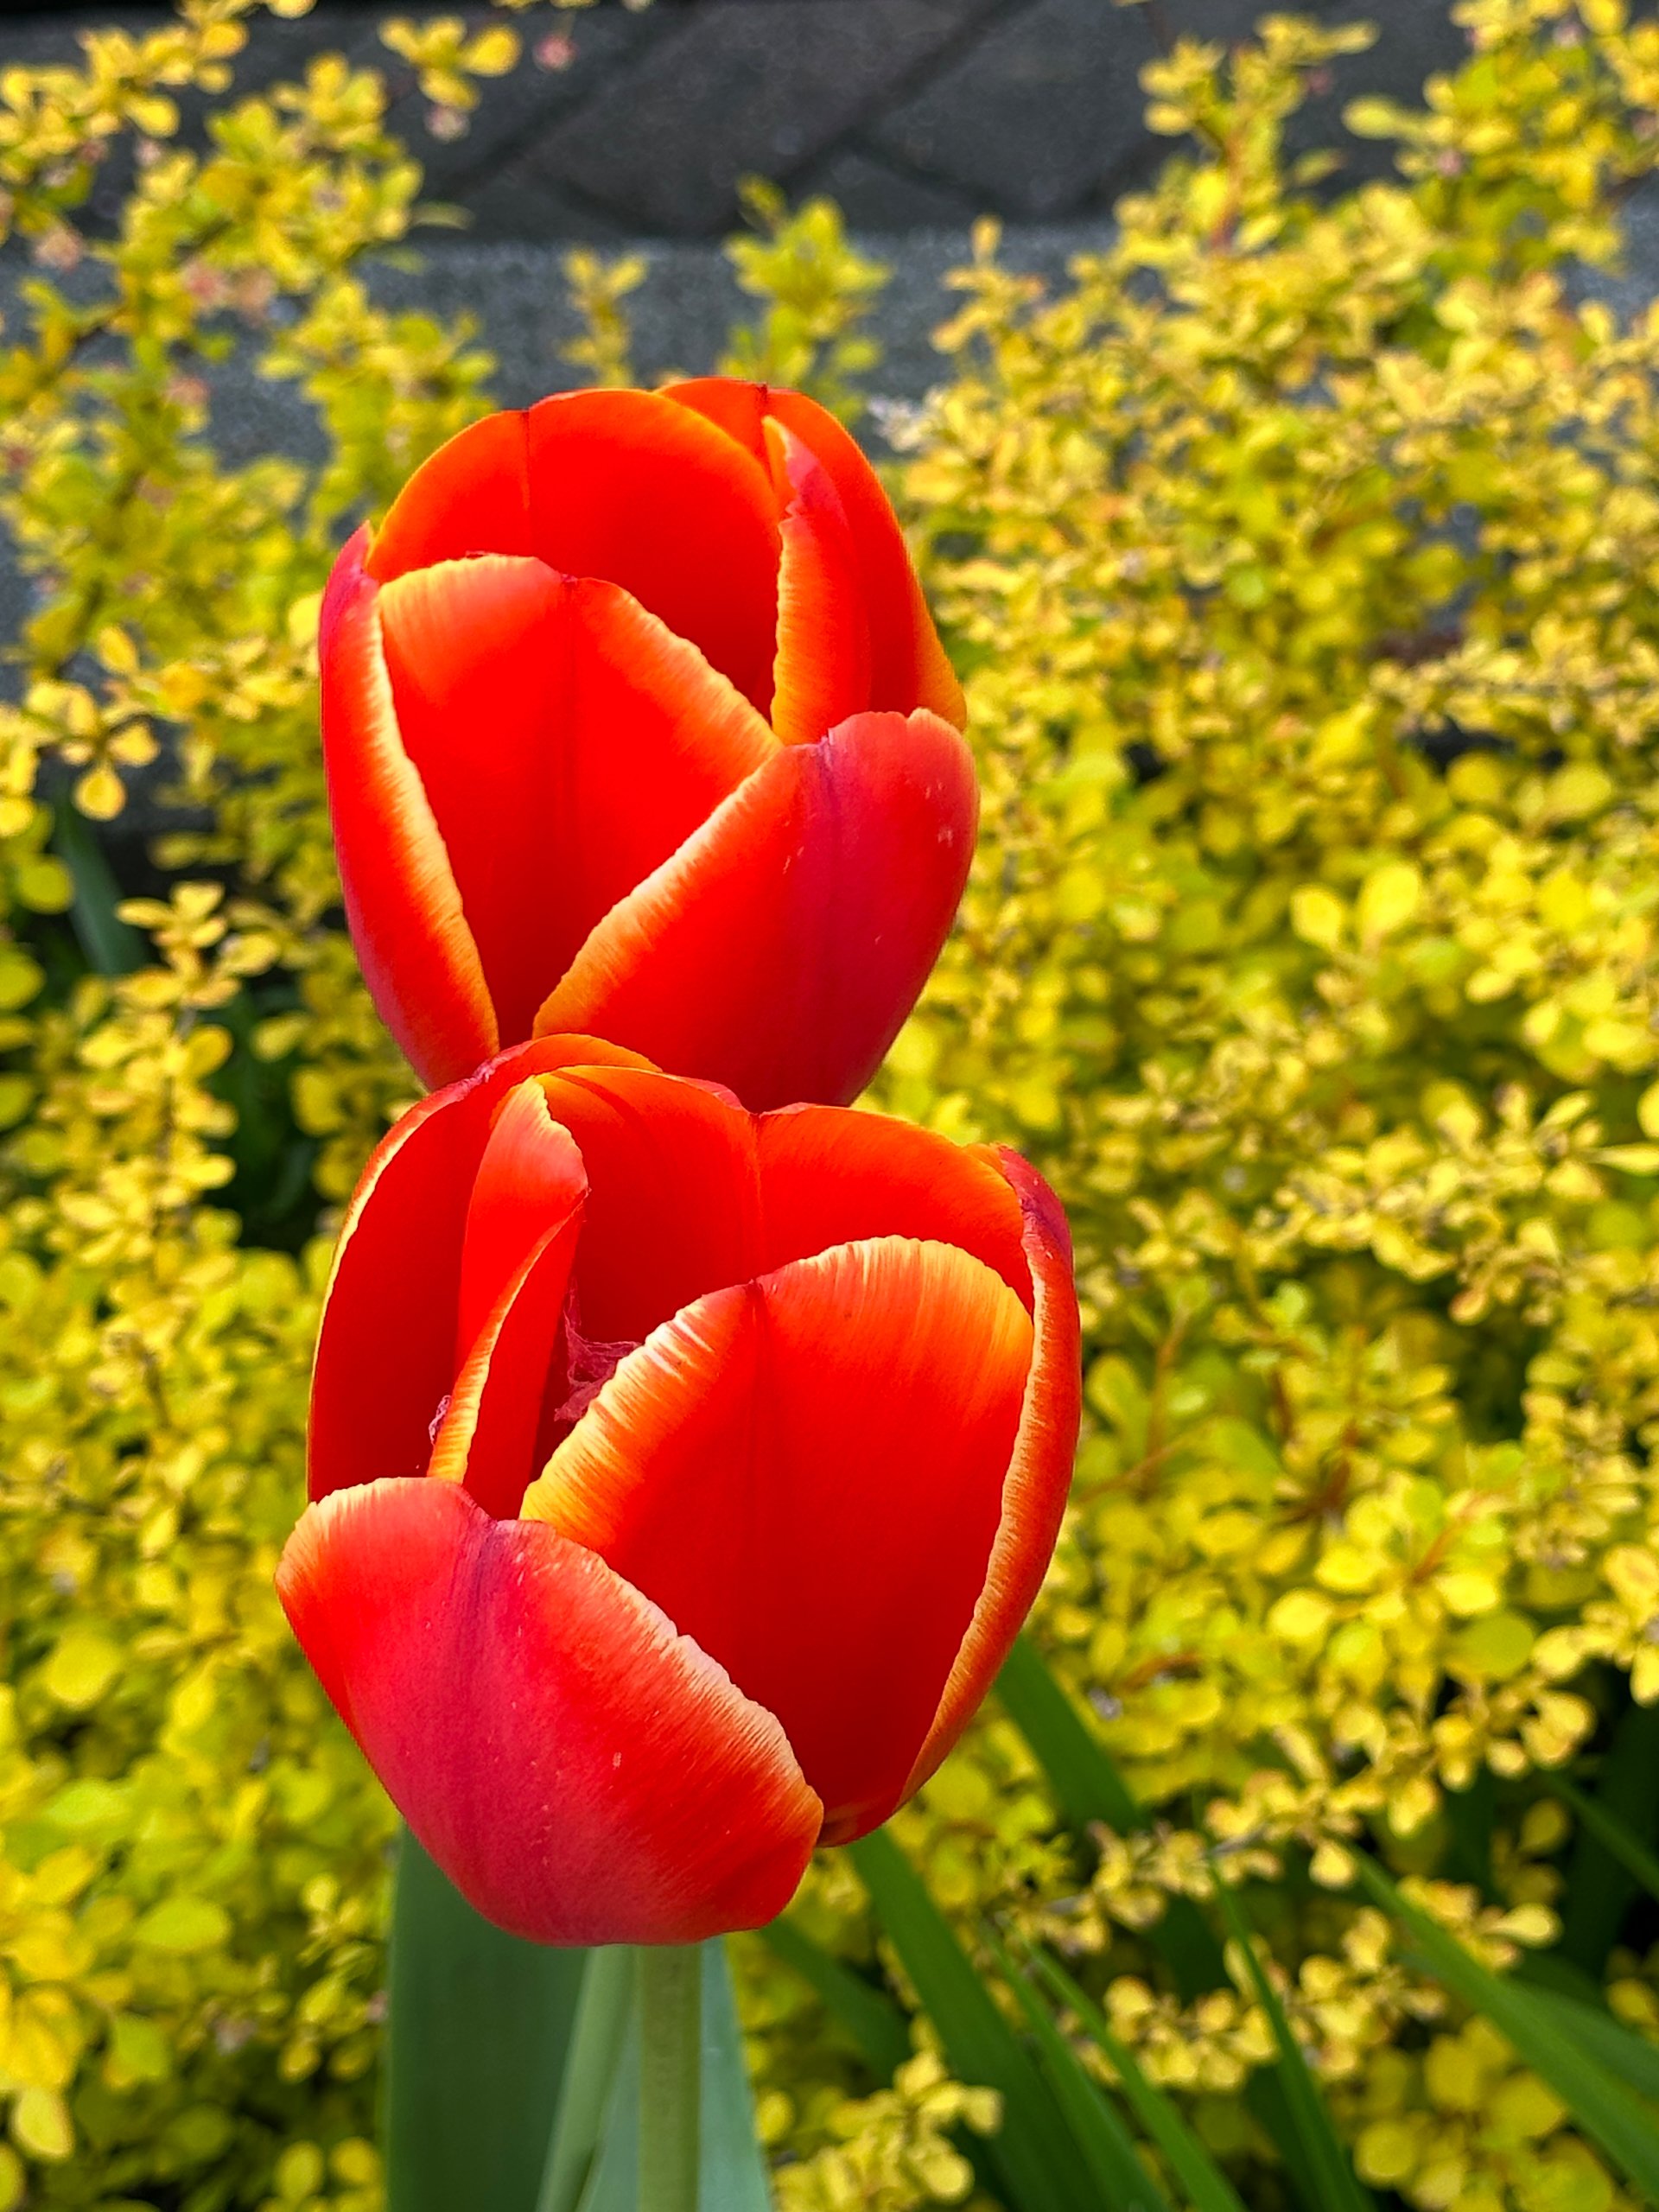  There’s a small public park near us that always has the most amazing tulips in the spring. 